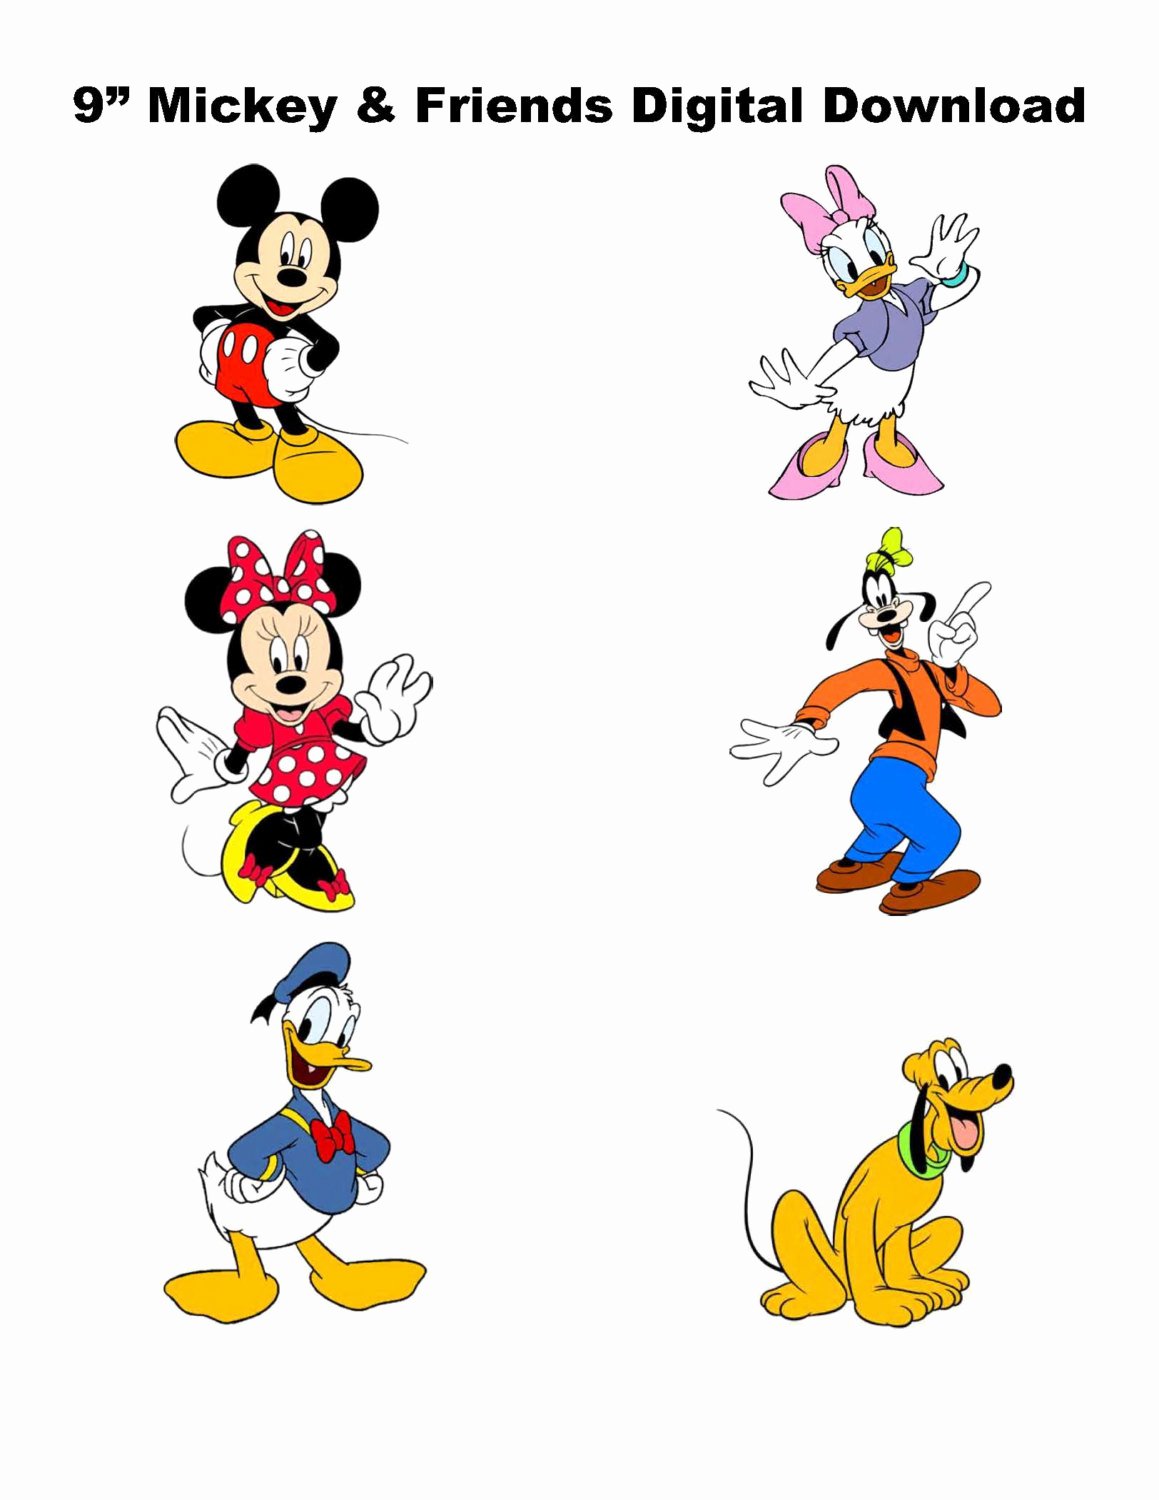 Mickey Mouse Printable Cutouts Lovely 9 Digital Mickey and Friends Centerpieces Large Size